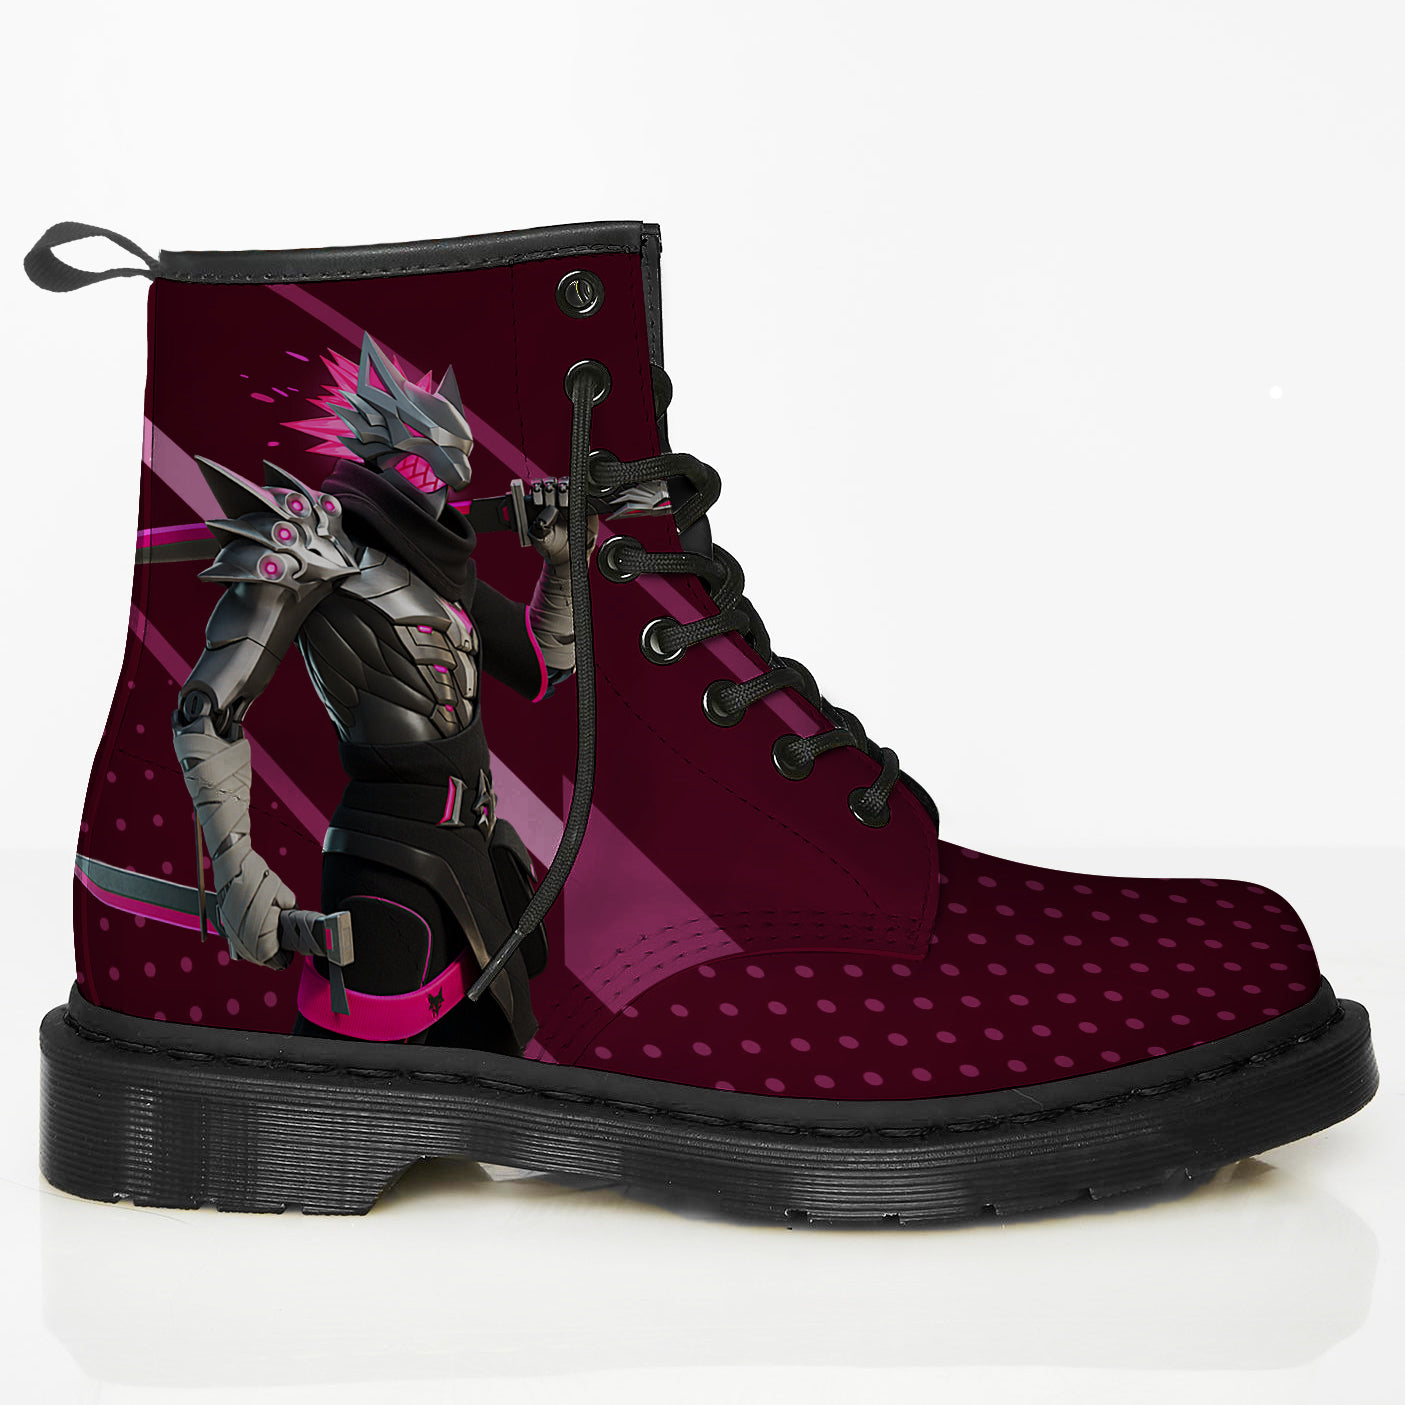 The Burning Wolf Boots